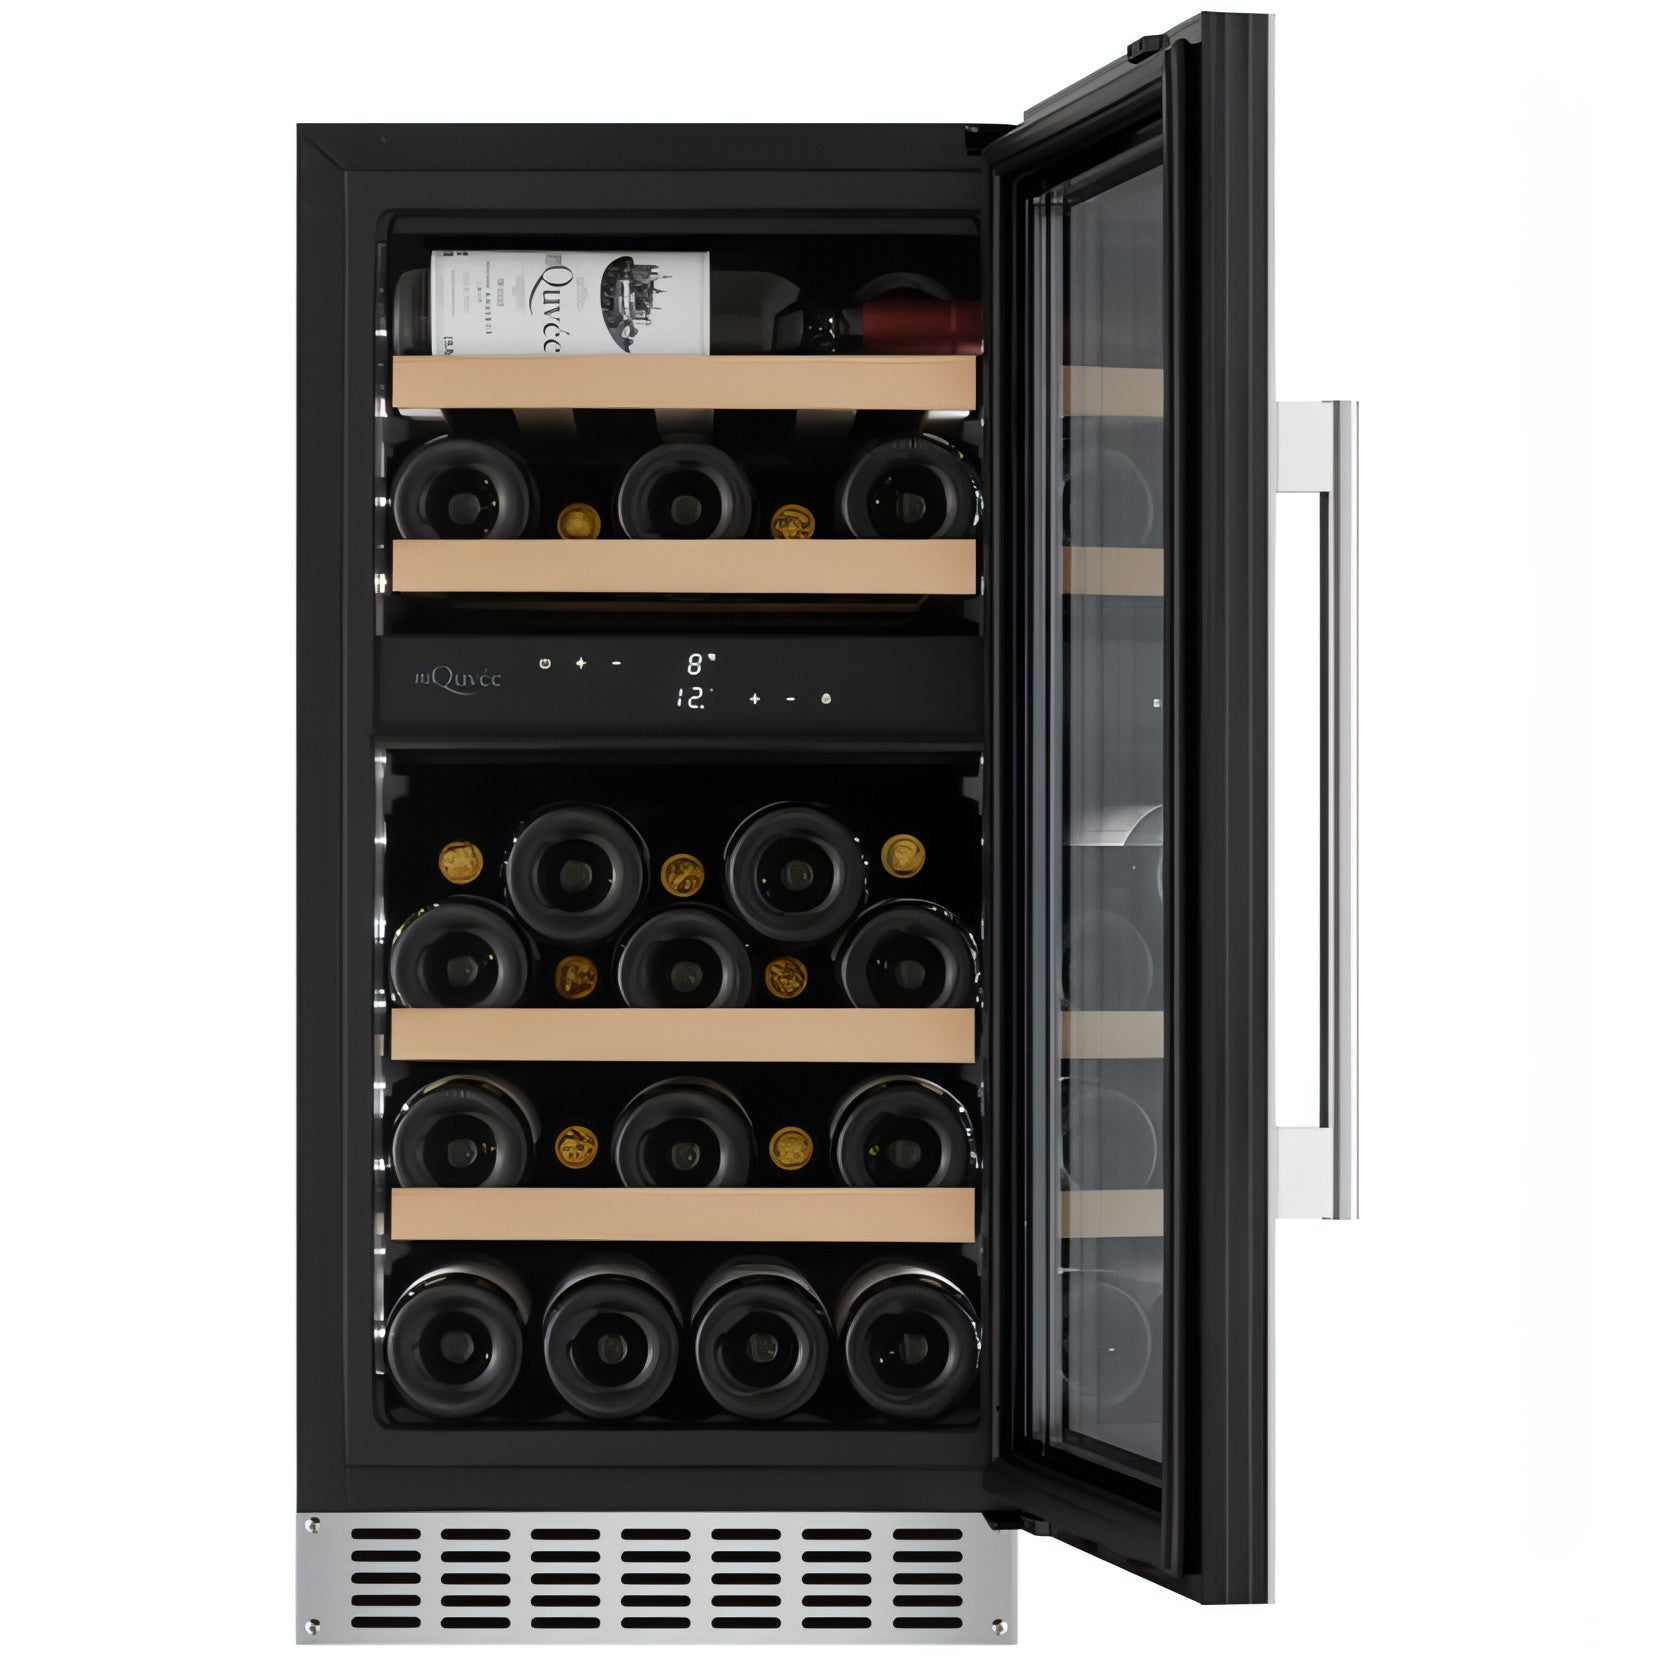 mQuvée - 400mm - Undercounter Wine Fridge - WineCave 700 40D Stainless